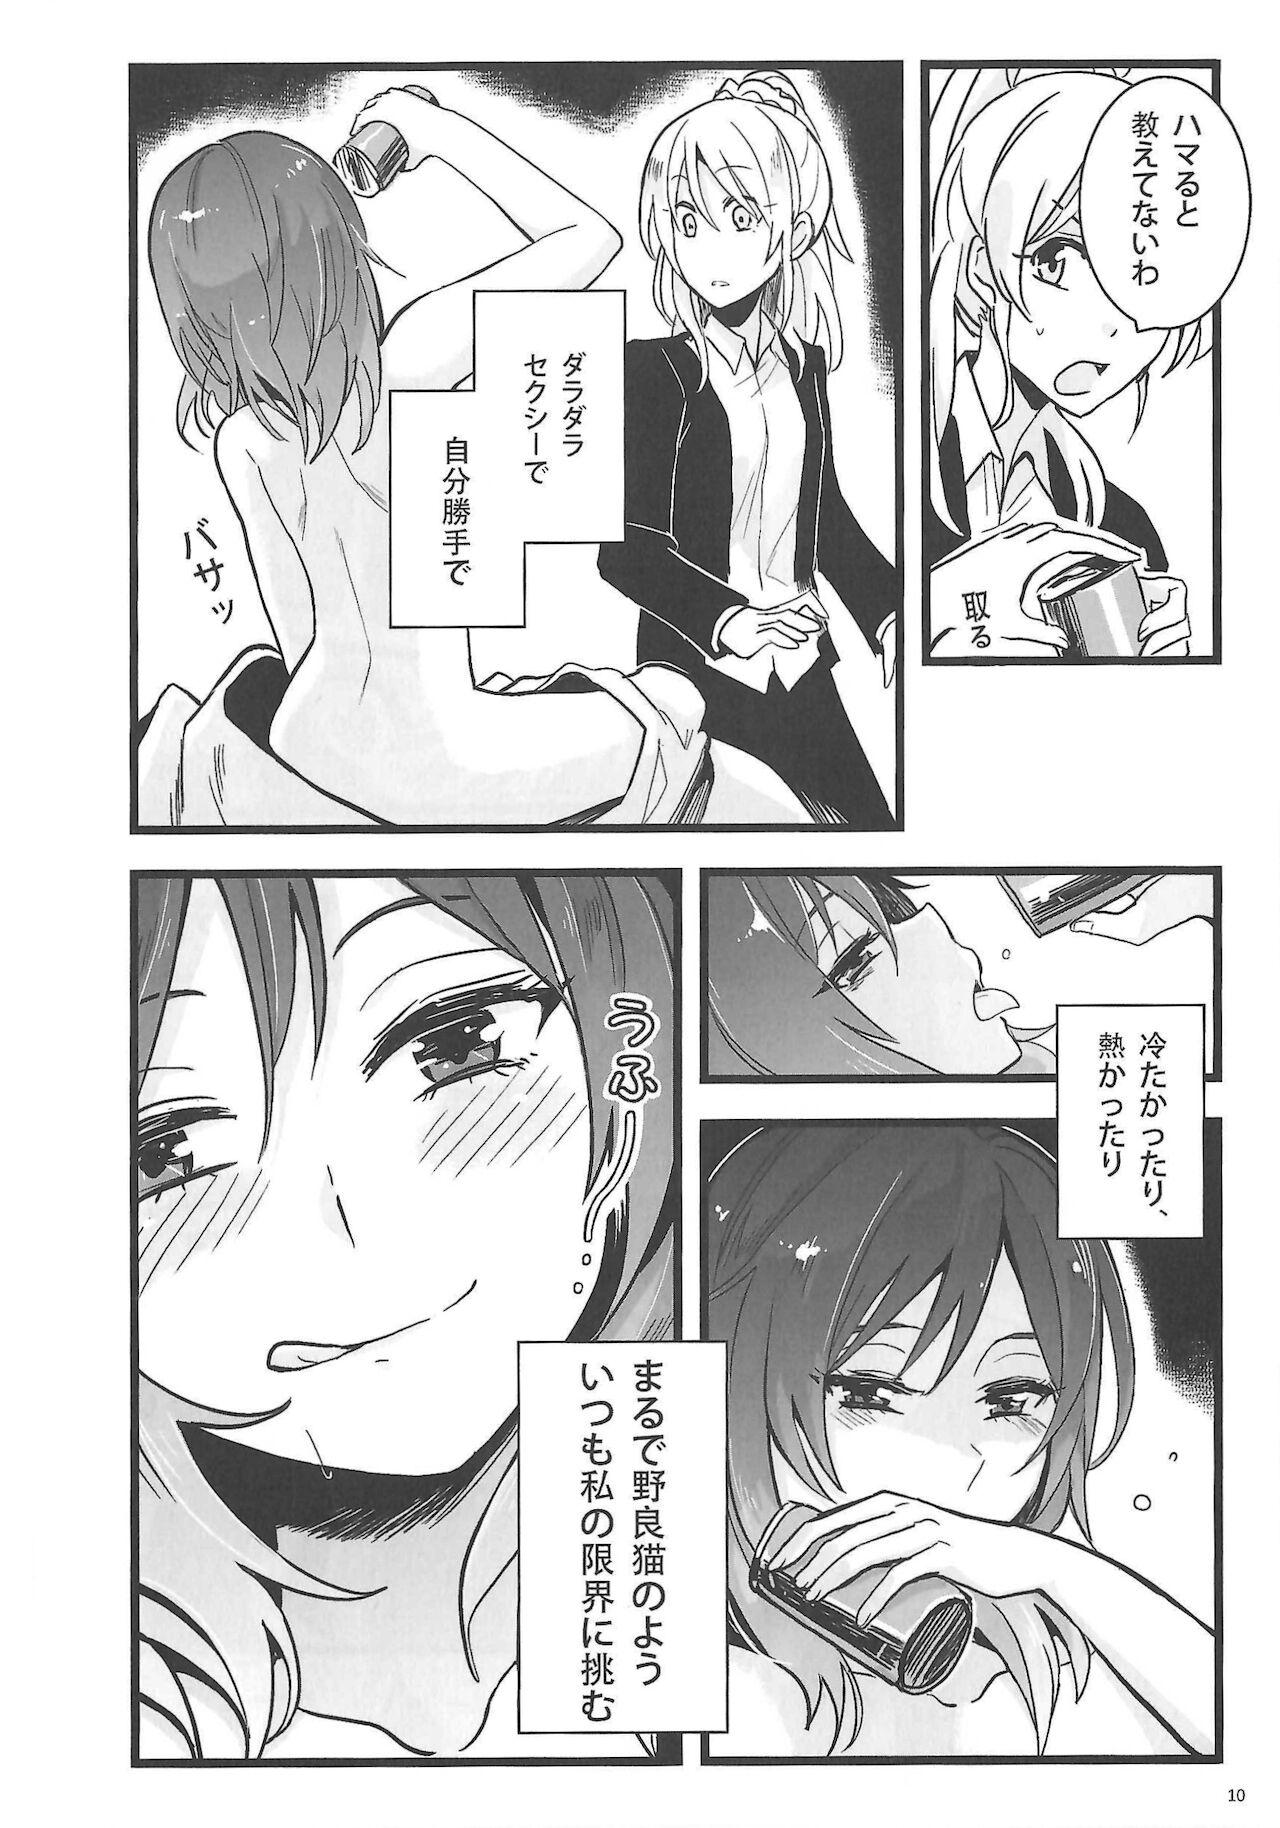 Old And Young Ode to Losers - Love live Wanking - Page 11